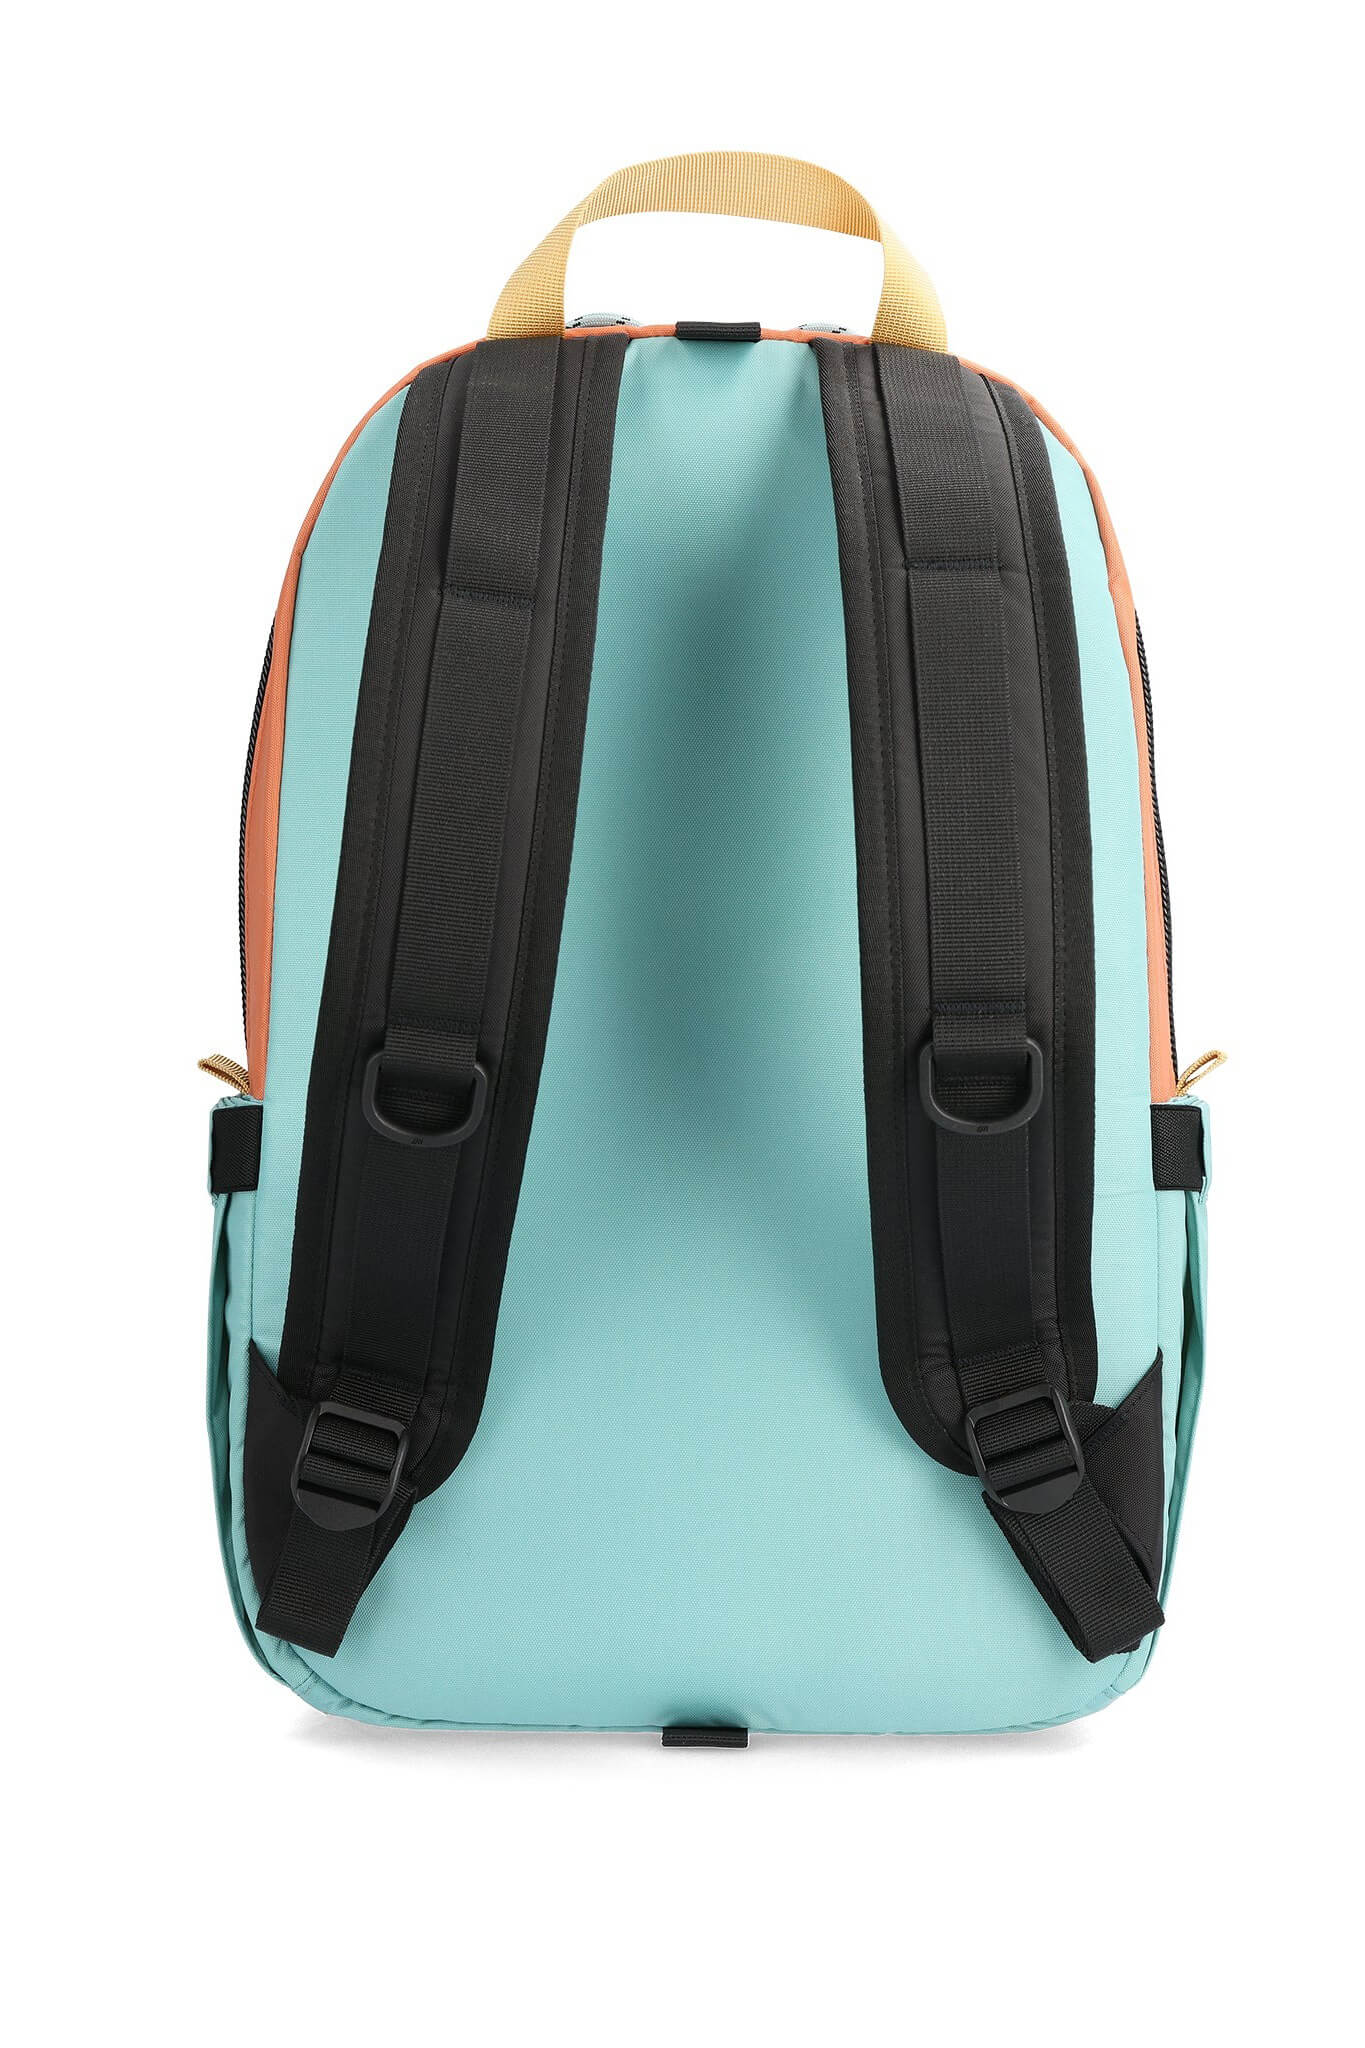 Topo Designs  light pack in light rose and geode green